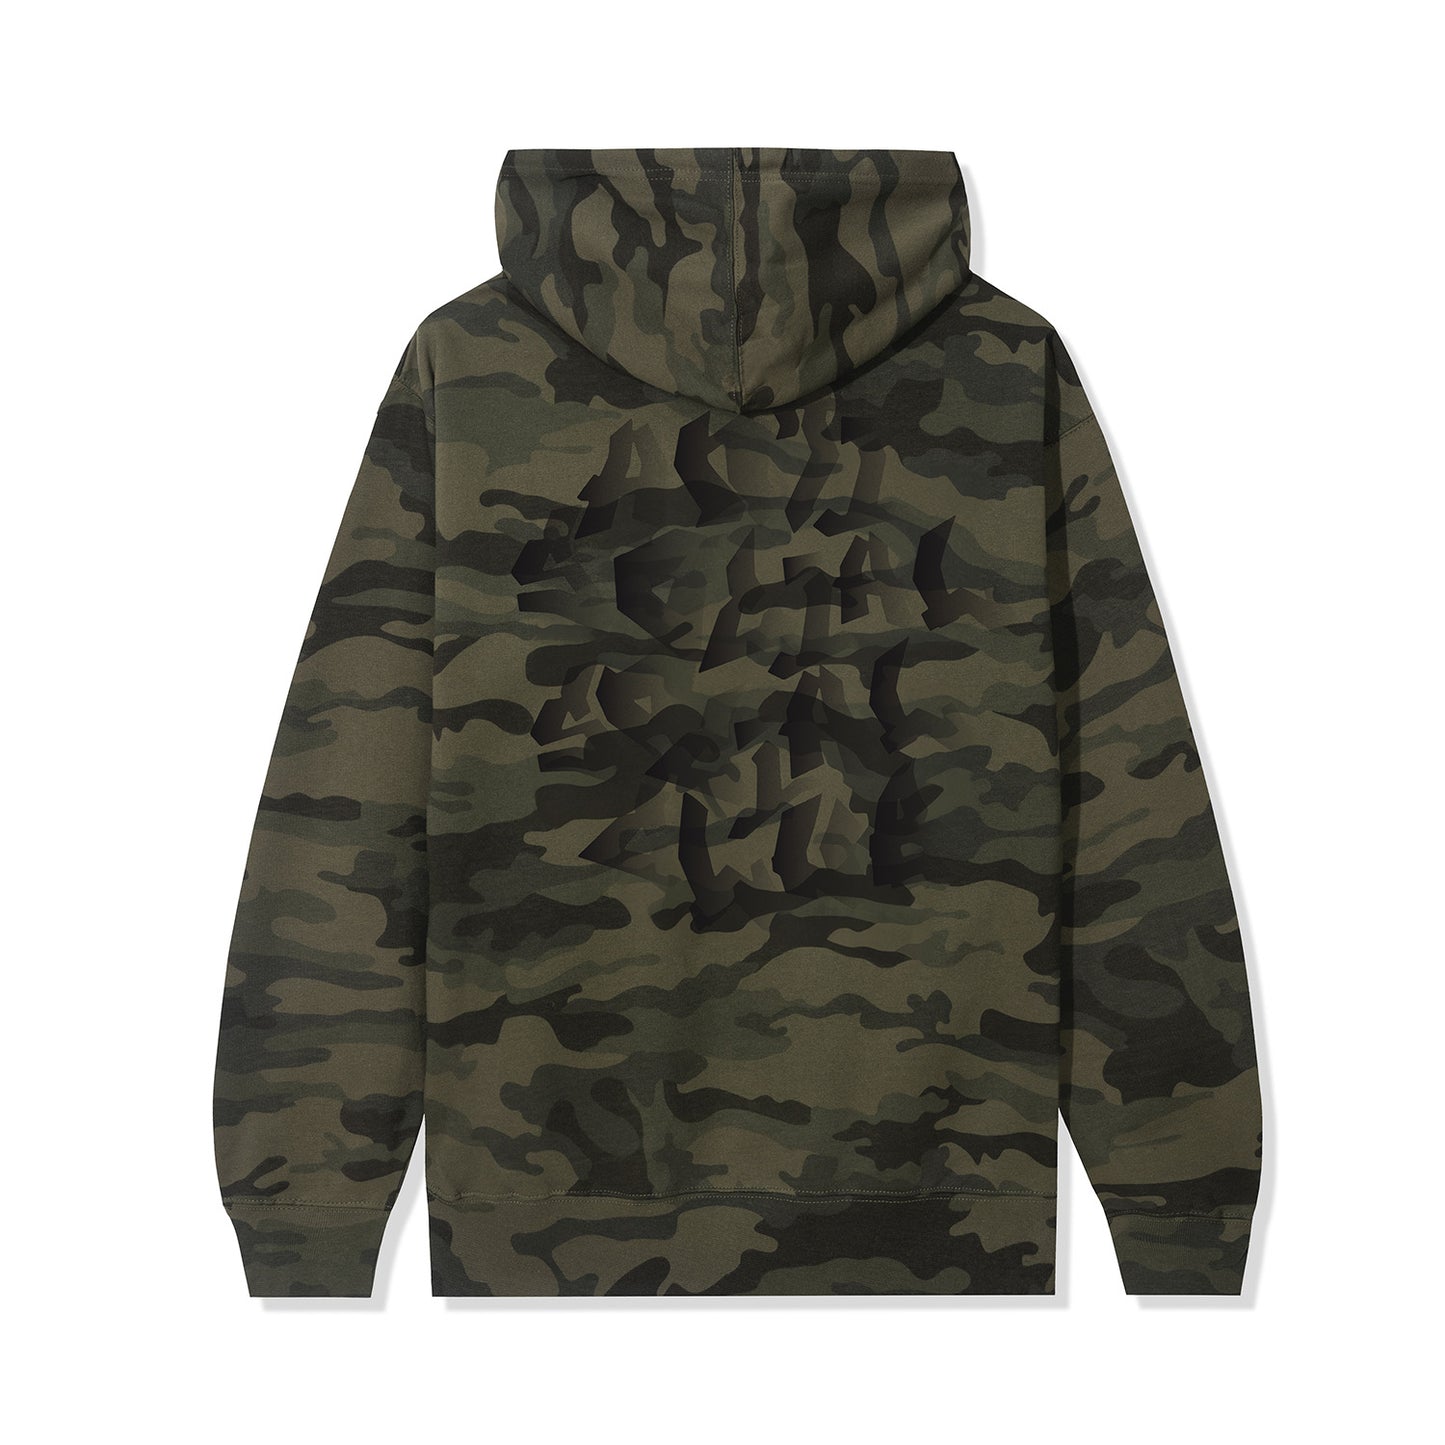 Cry Out Loud Hoodie - Forest Camo – AntiSocialSocialClub